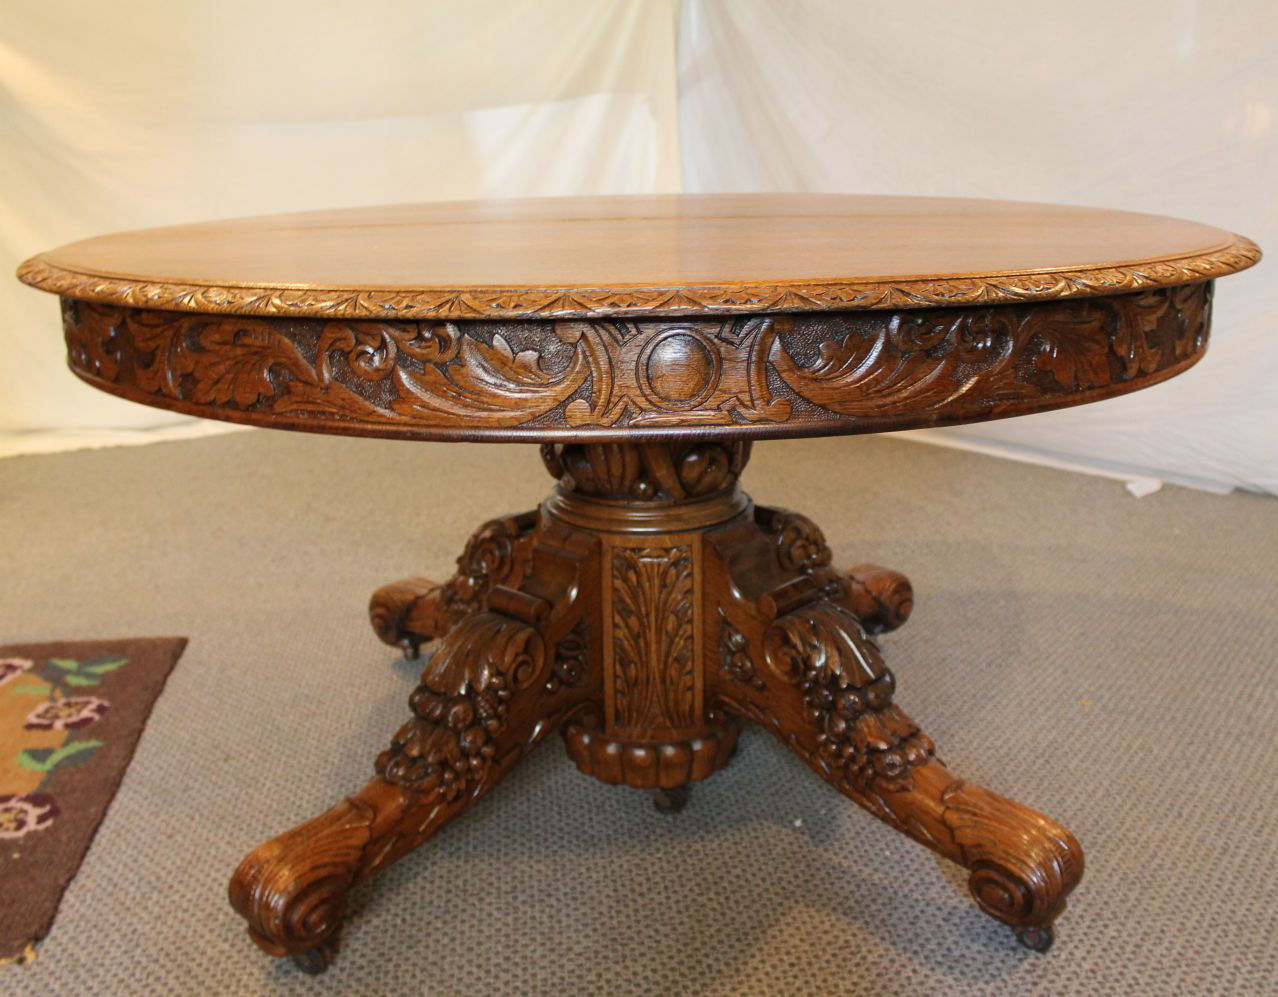 Bargain John's Antiques | Victorian Carved Oak Round Table with 6